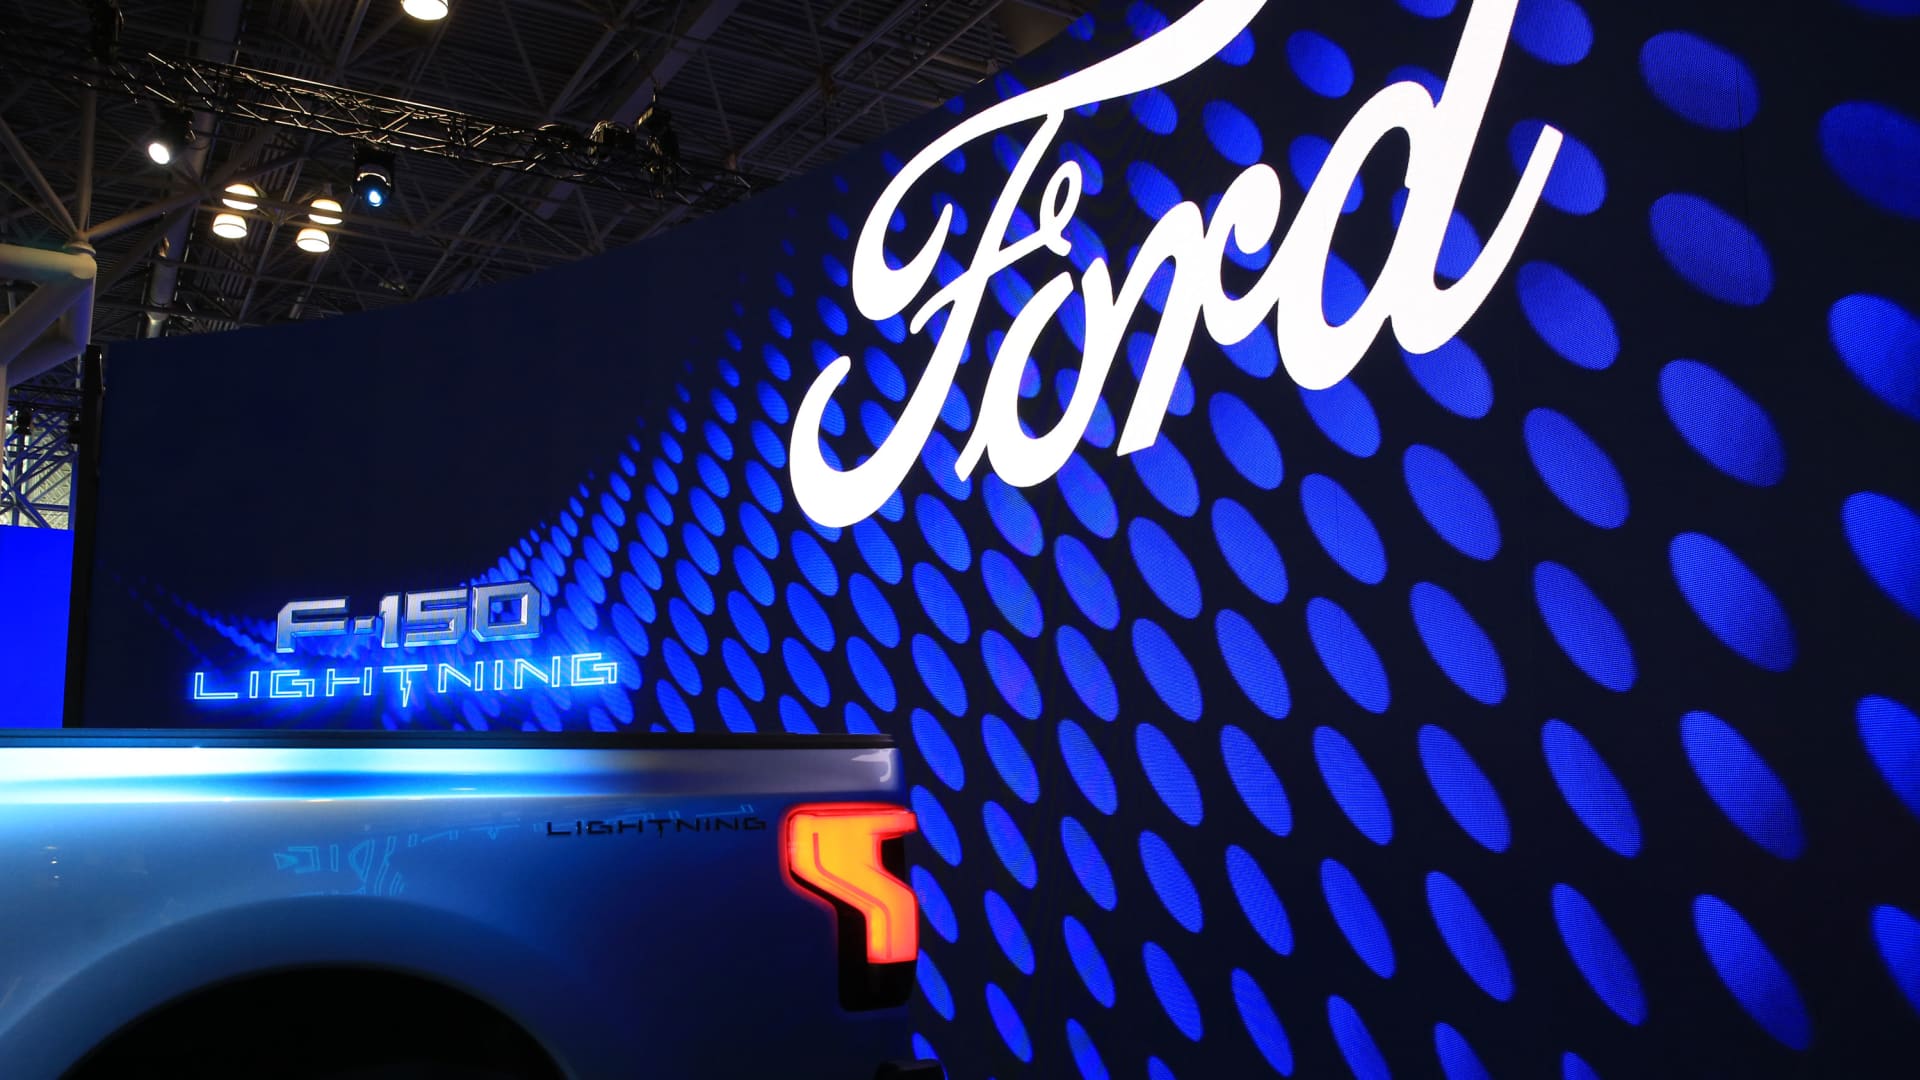 Ford to cut 3,800 jobs in Europe in shift to electric vehicle production